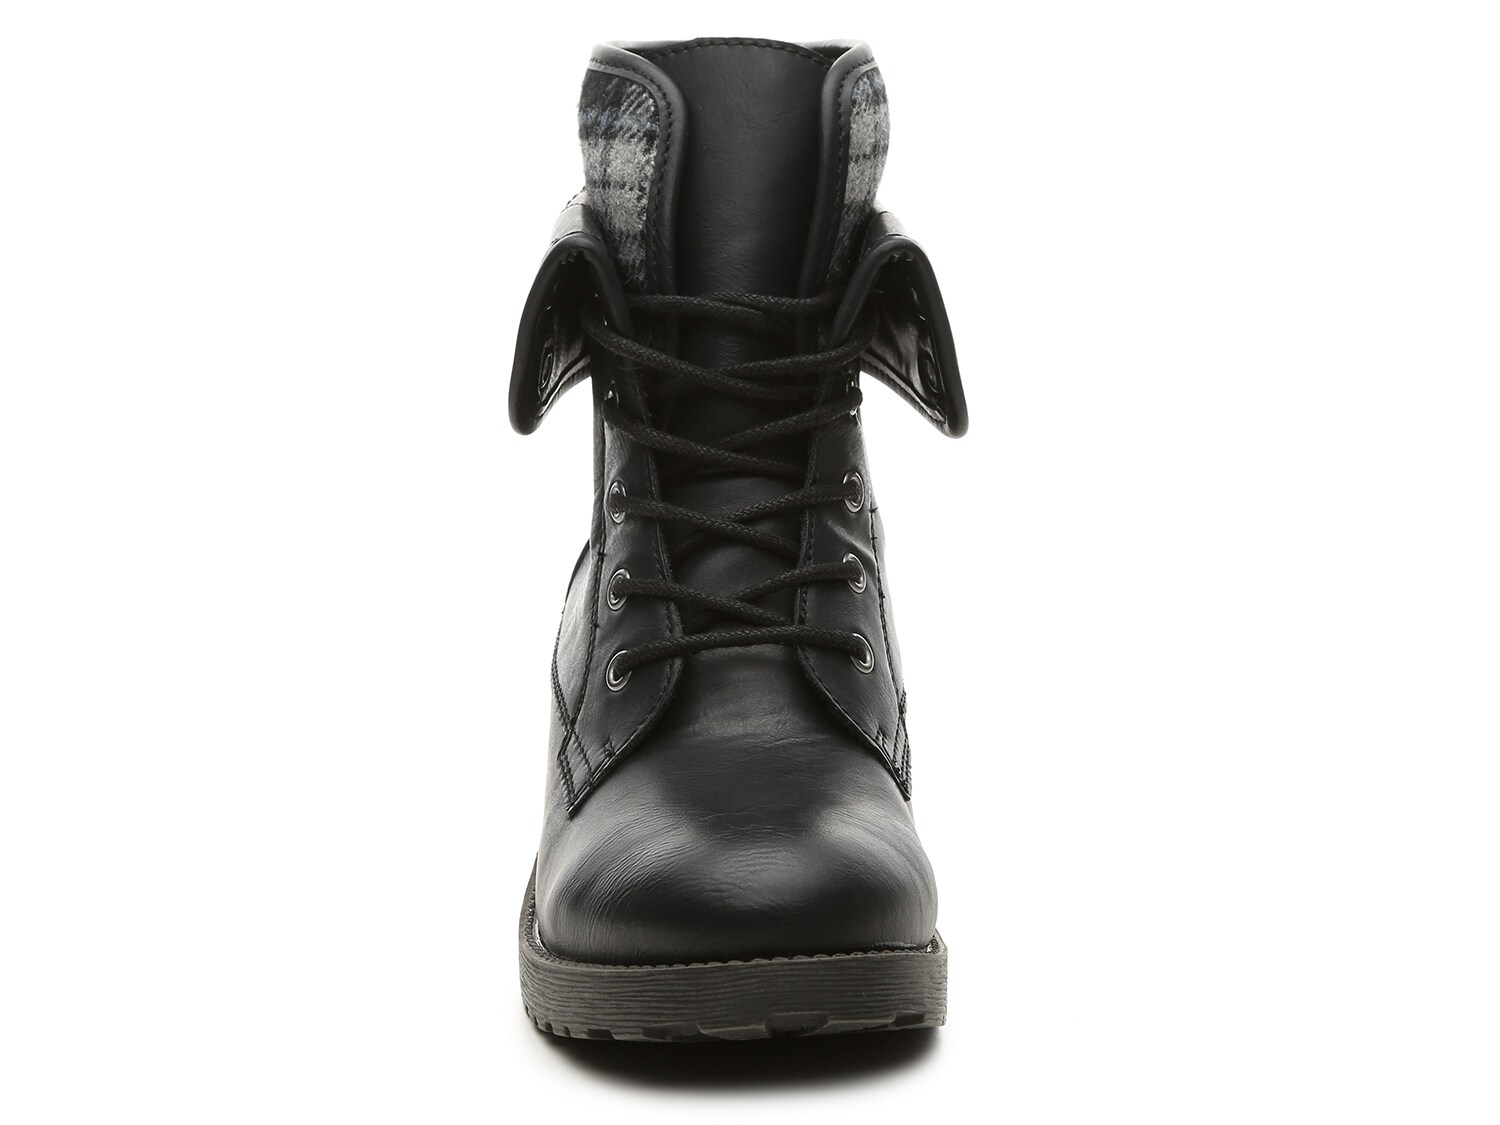 rock and candy combat boots